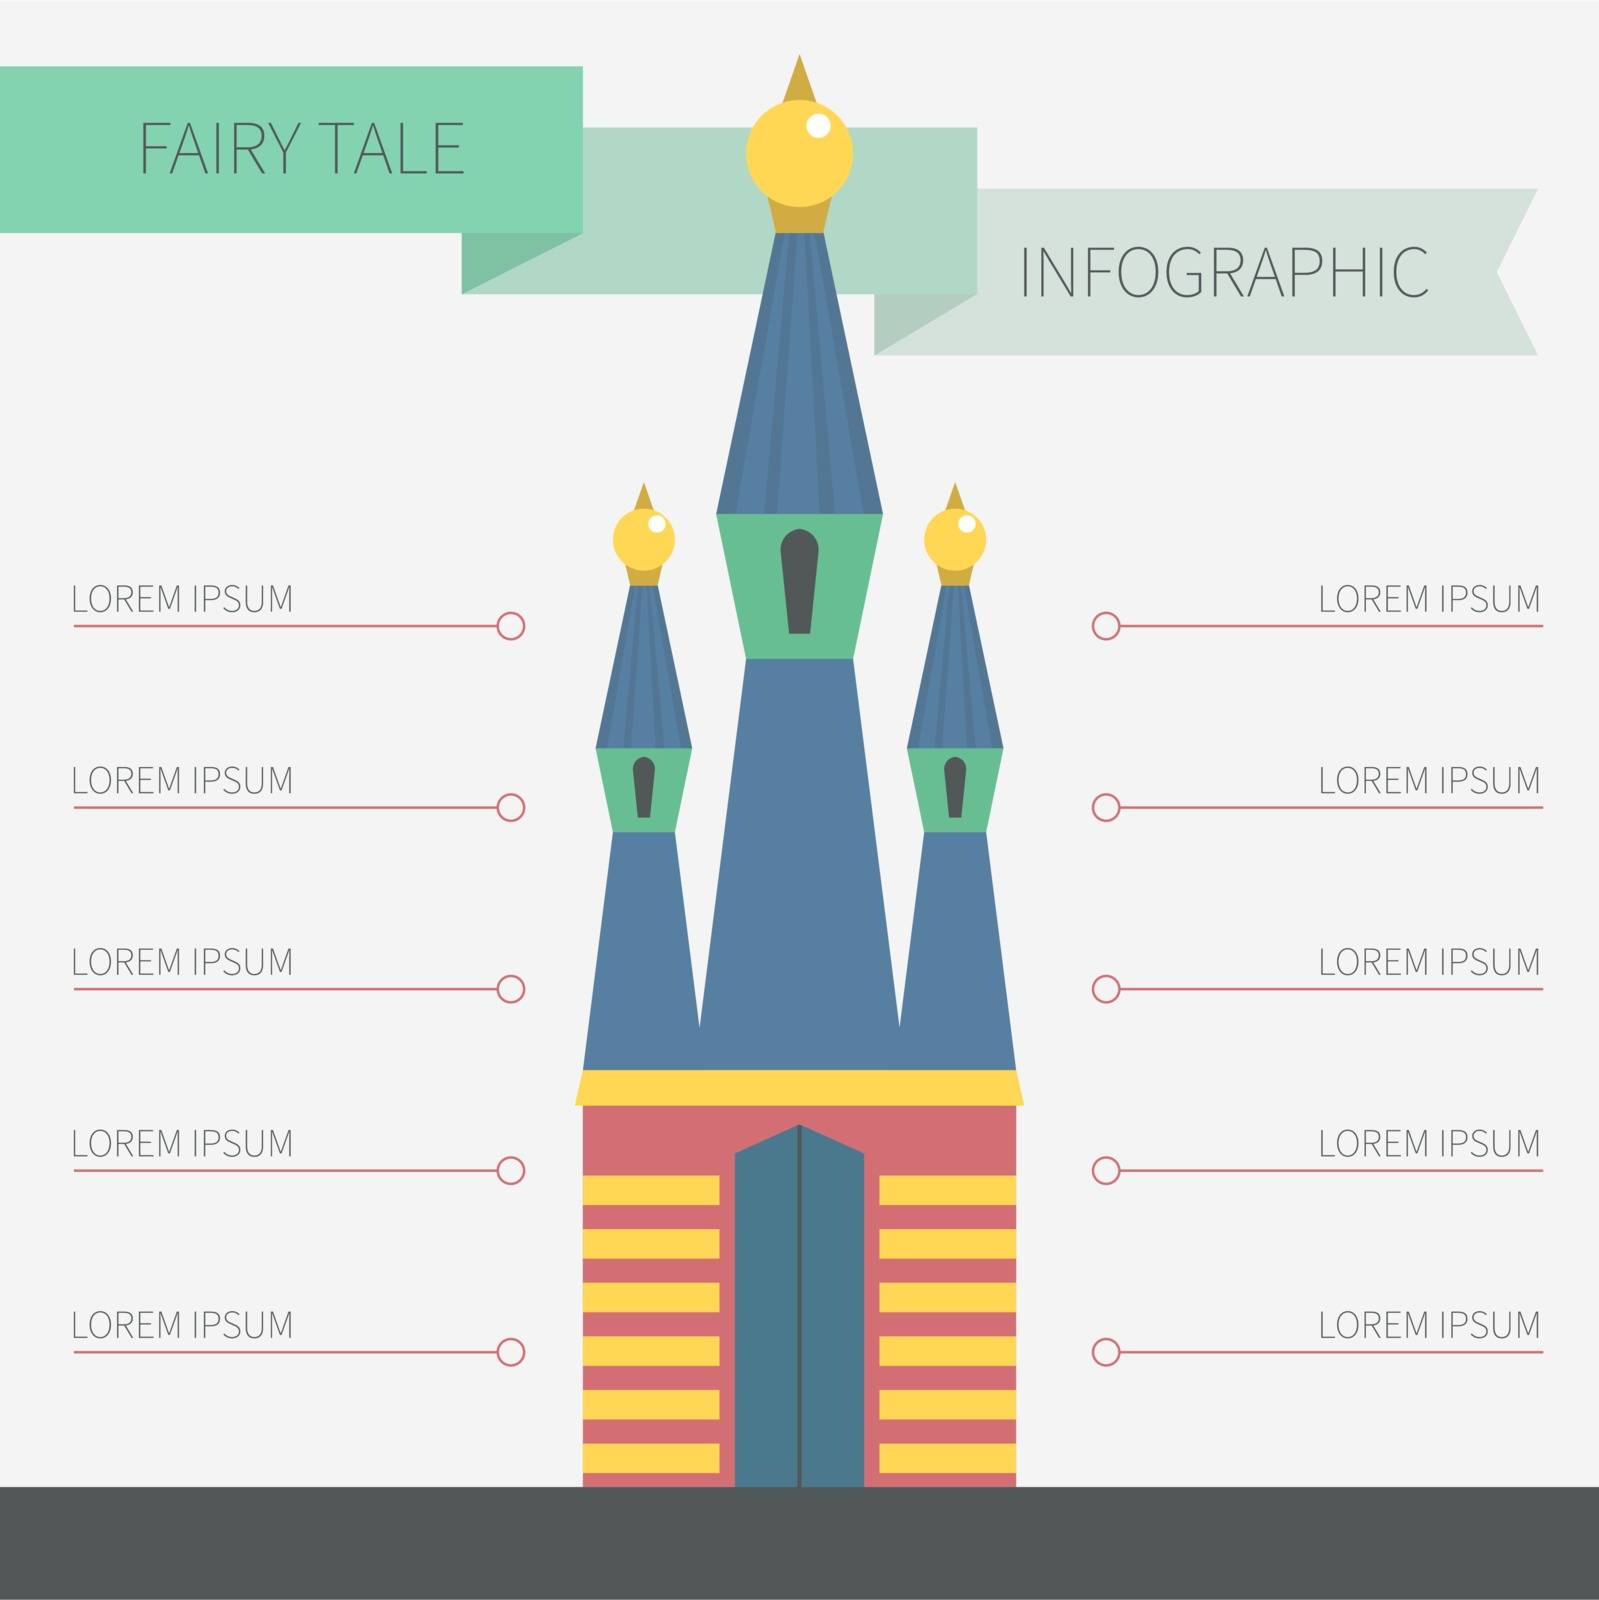 Castle Infographic by Favete